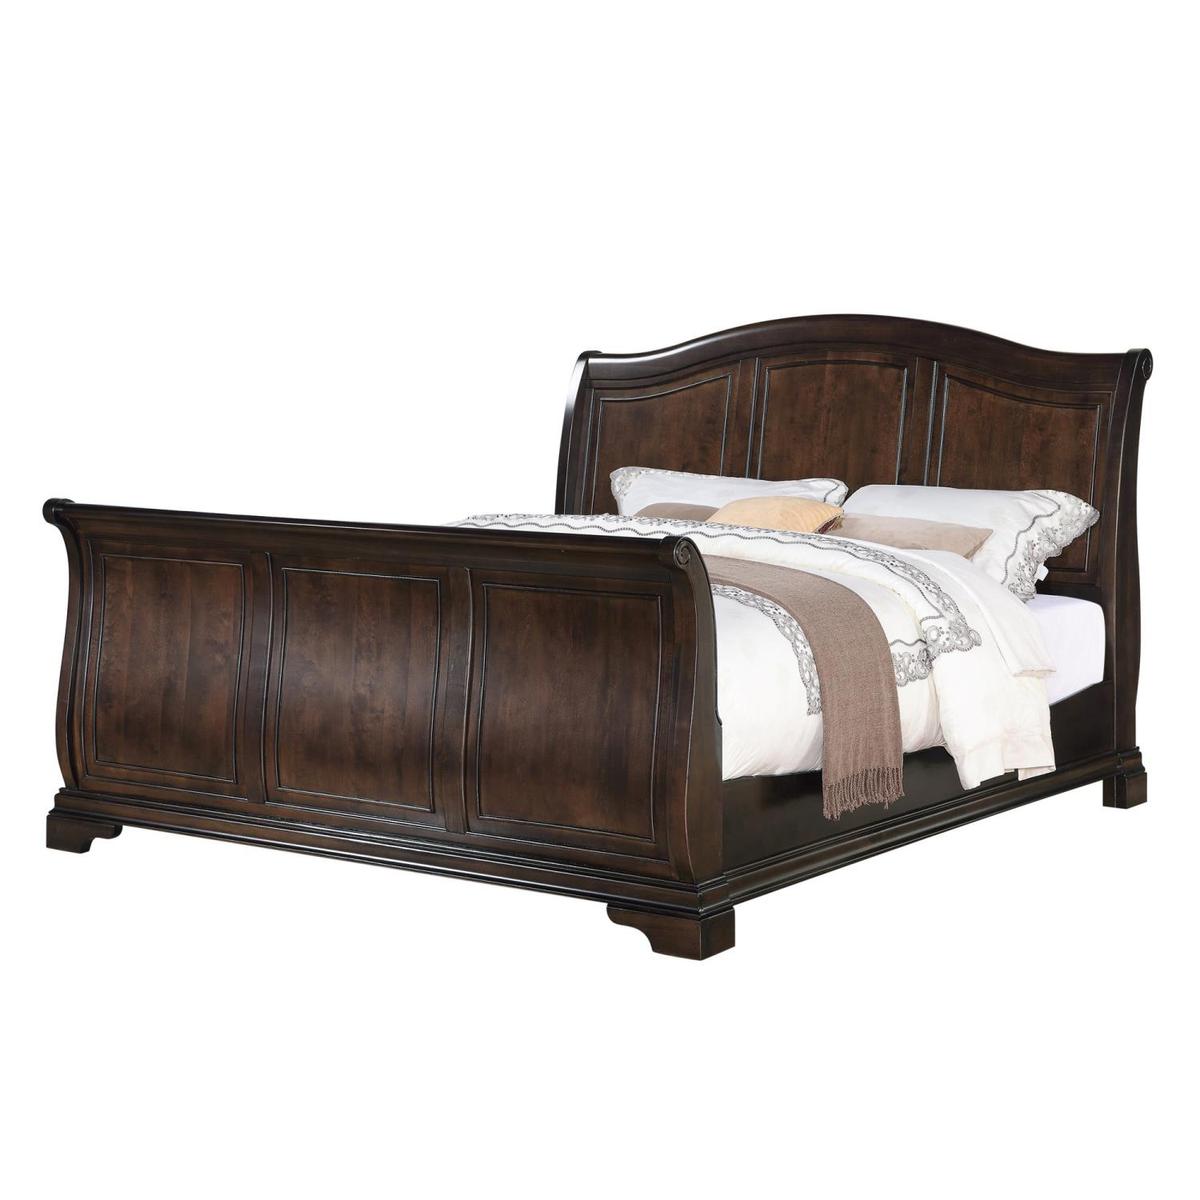 Picket House Furnishings Conley Cherry Queen Sleigh Bed CM750QSB